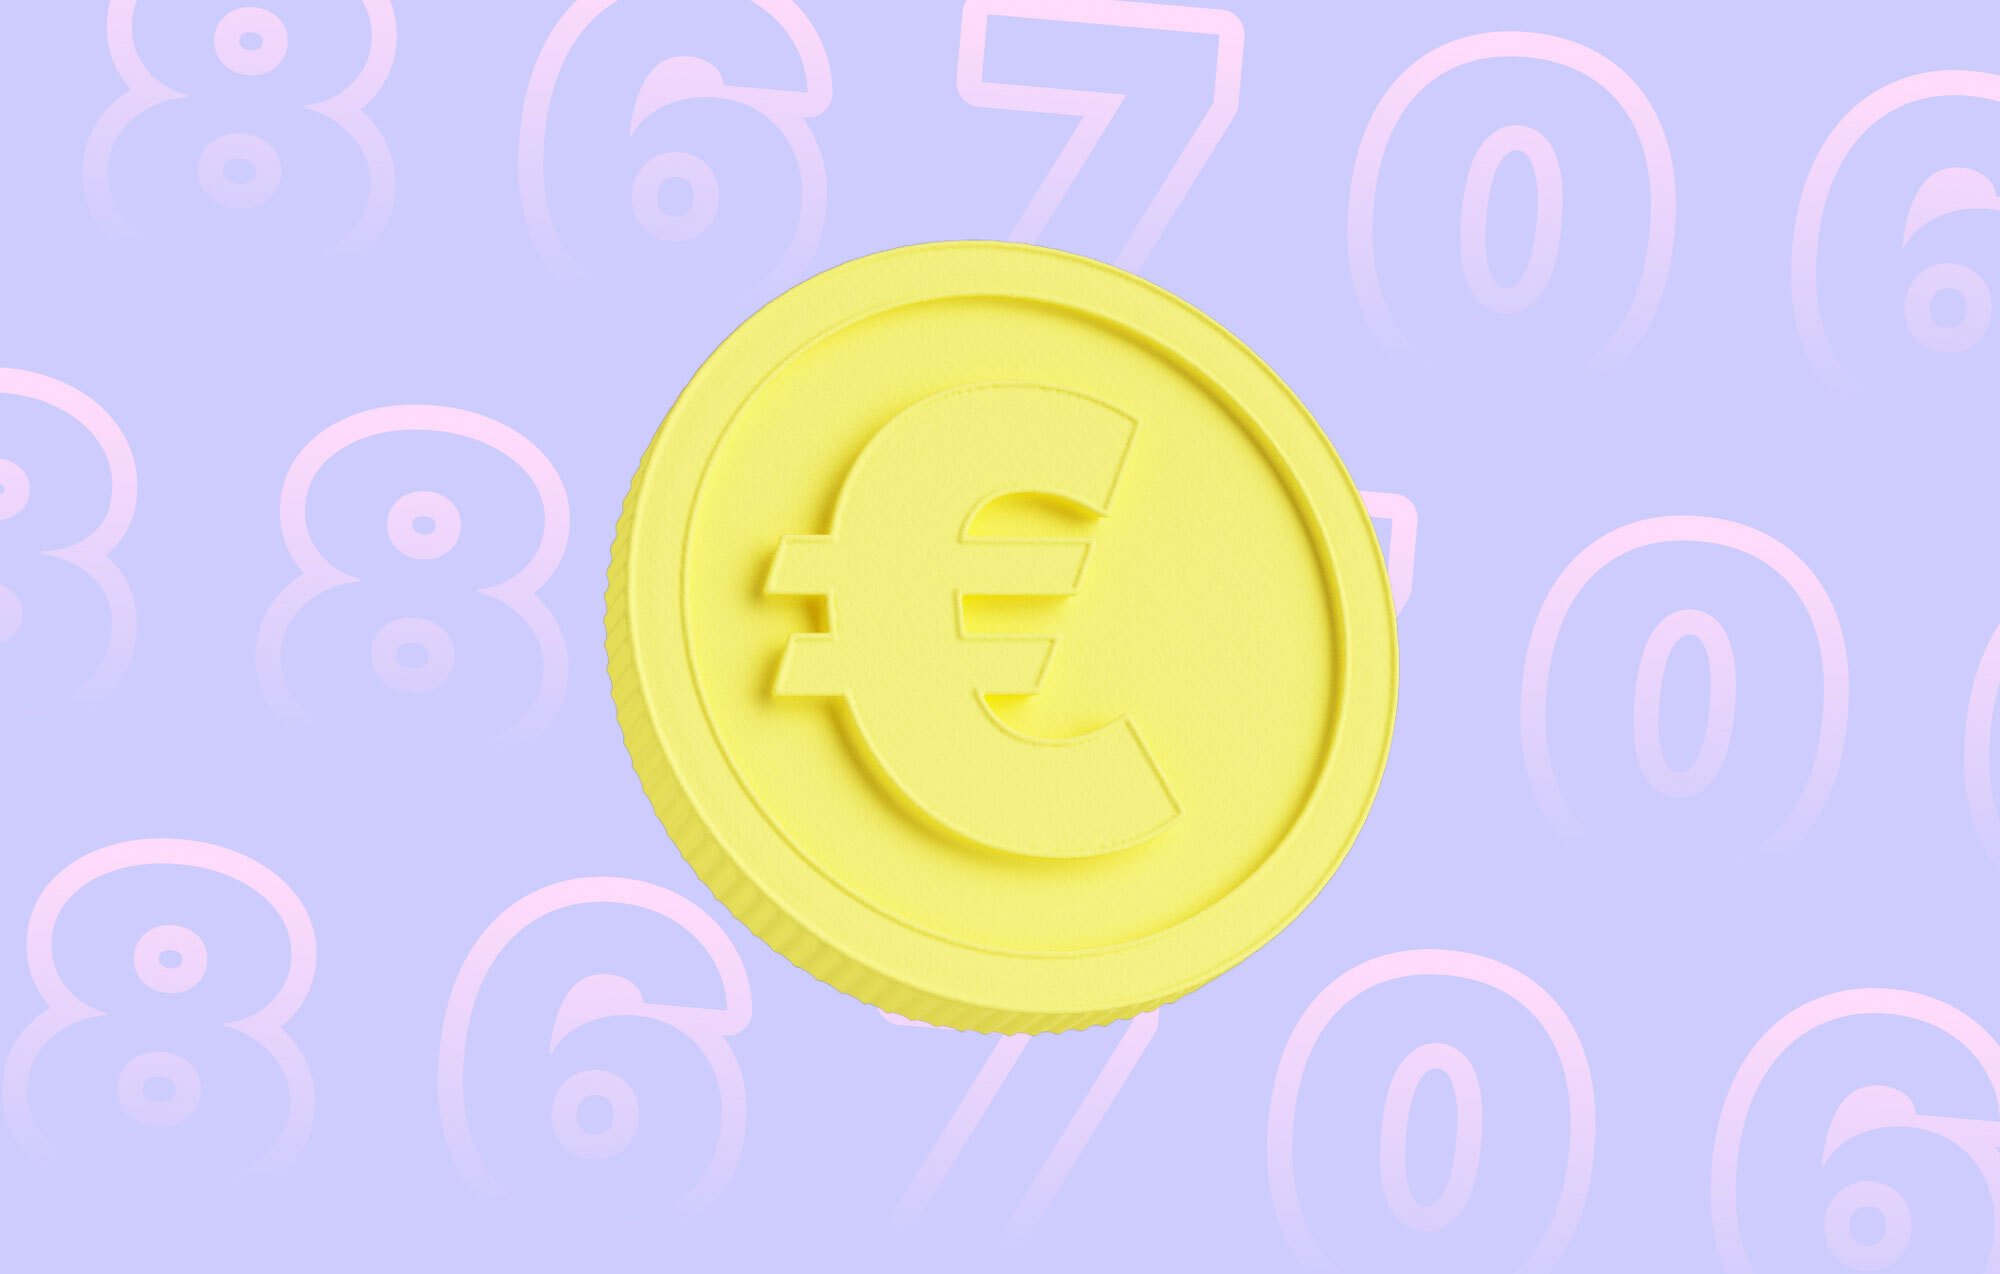 Yellow coin with euro symbol with pink numbers in the background – for charles article about getting your first purchase with WhatsApp marketing